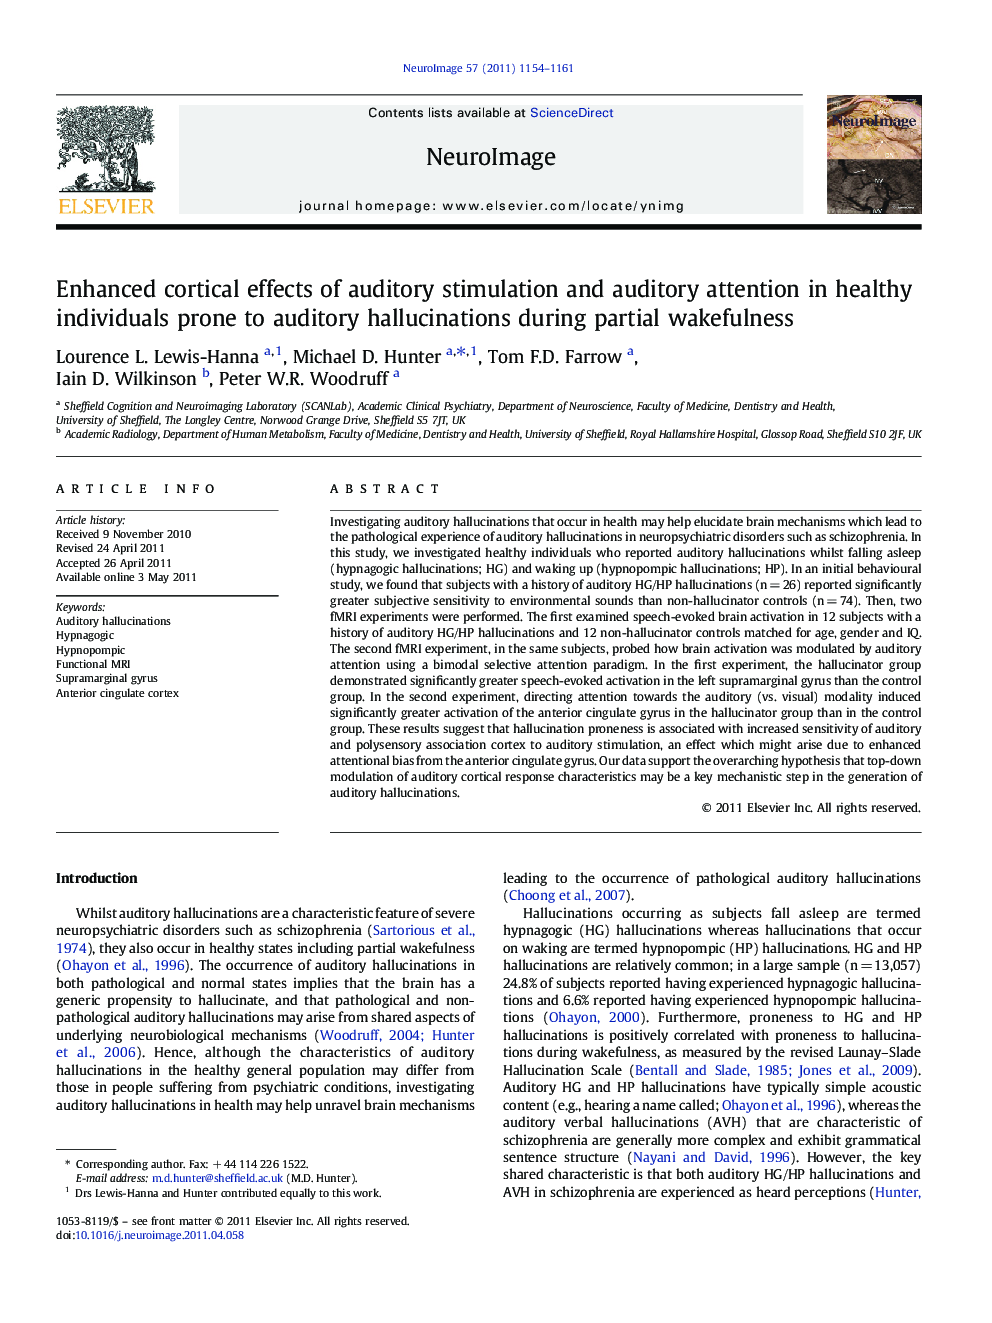 Enhanced cortical effects of auditory stimulation and auditory attention in healthy individuals prone to auditory hallucinations during partial wakefulness